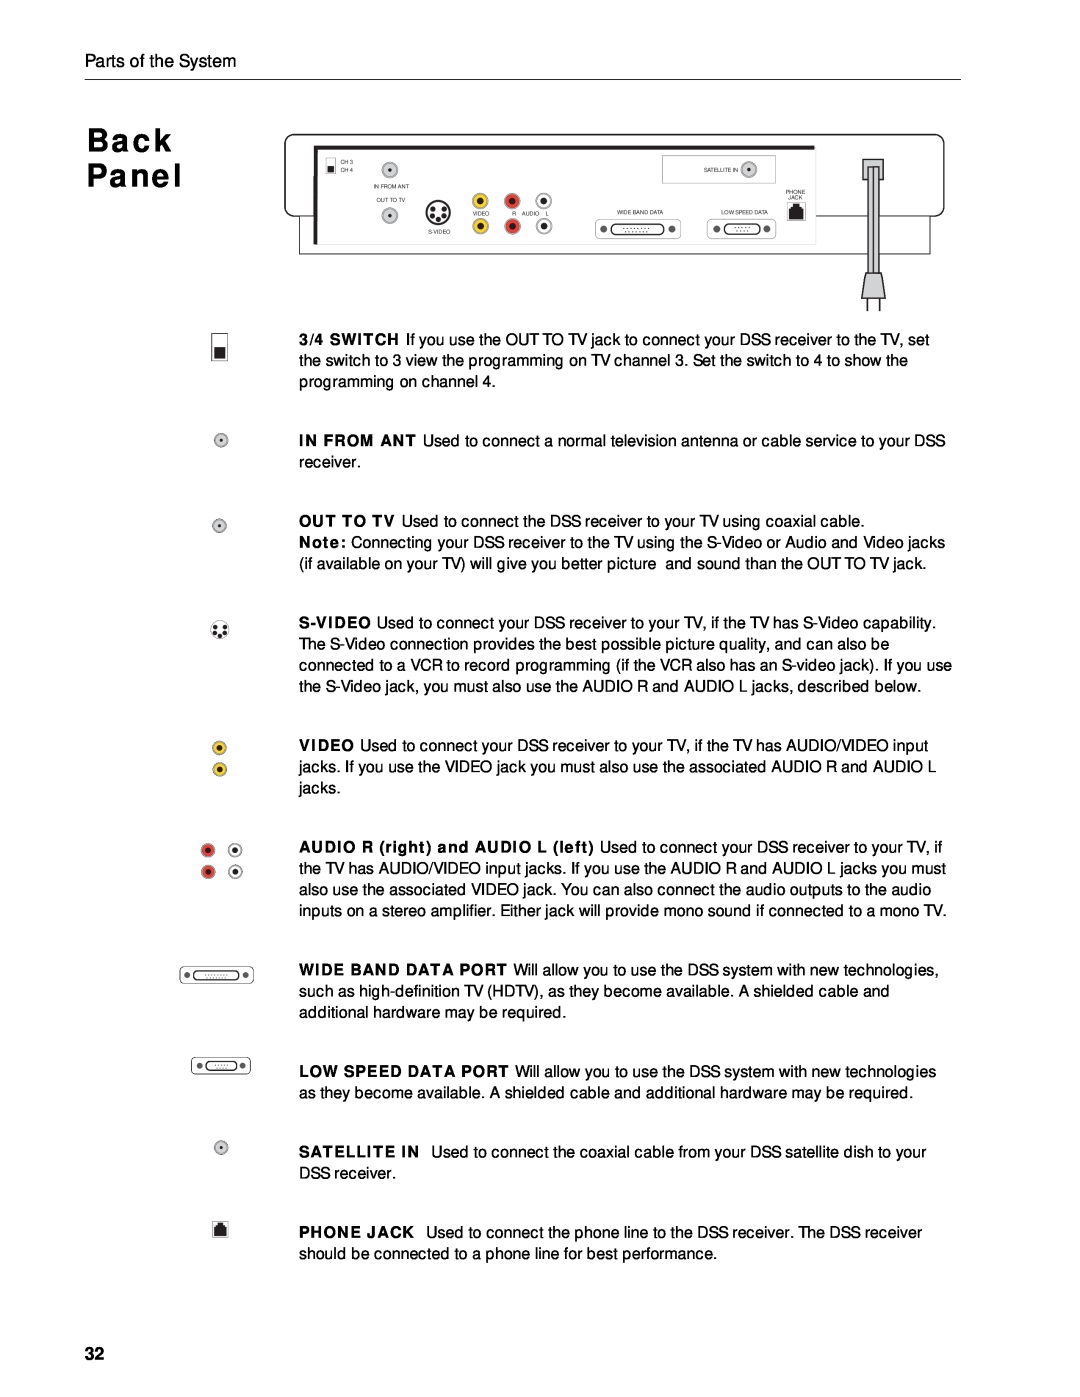 RCA DRD212NW user manual Back Panel, Parts of the System 